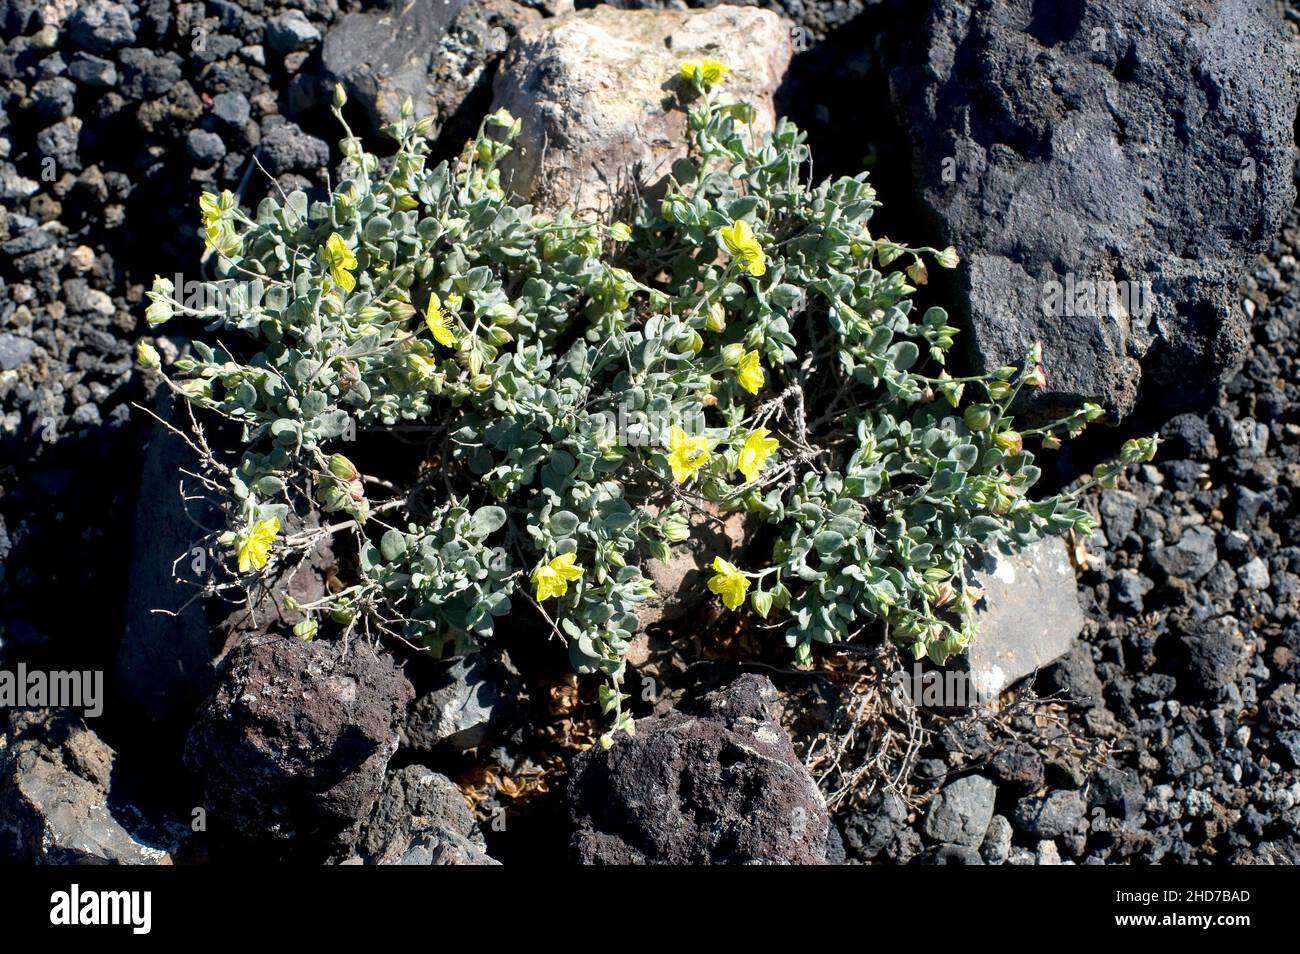 Turmero or jarilla turmera (Helianthemum canariense) is a prostrate shrub native to Canary Islands and northwestern Africa. This photo was taken in Stock Photo